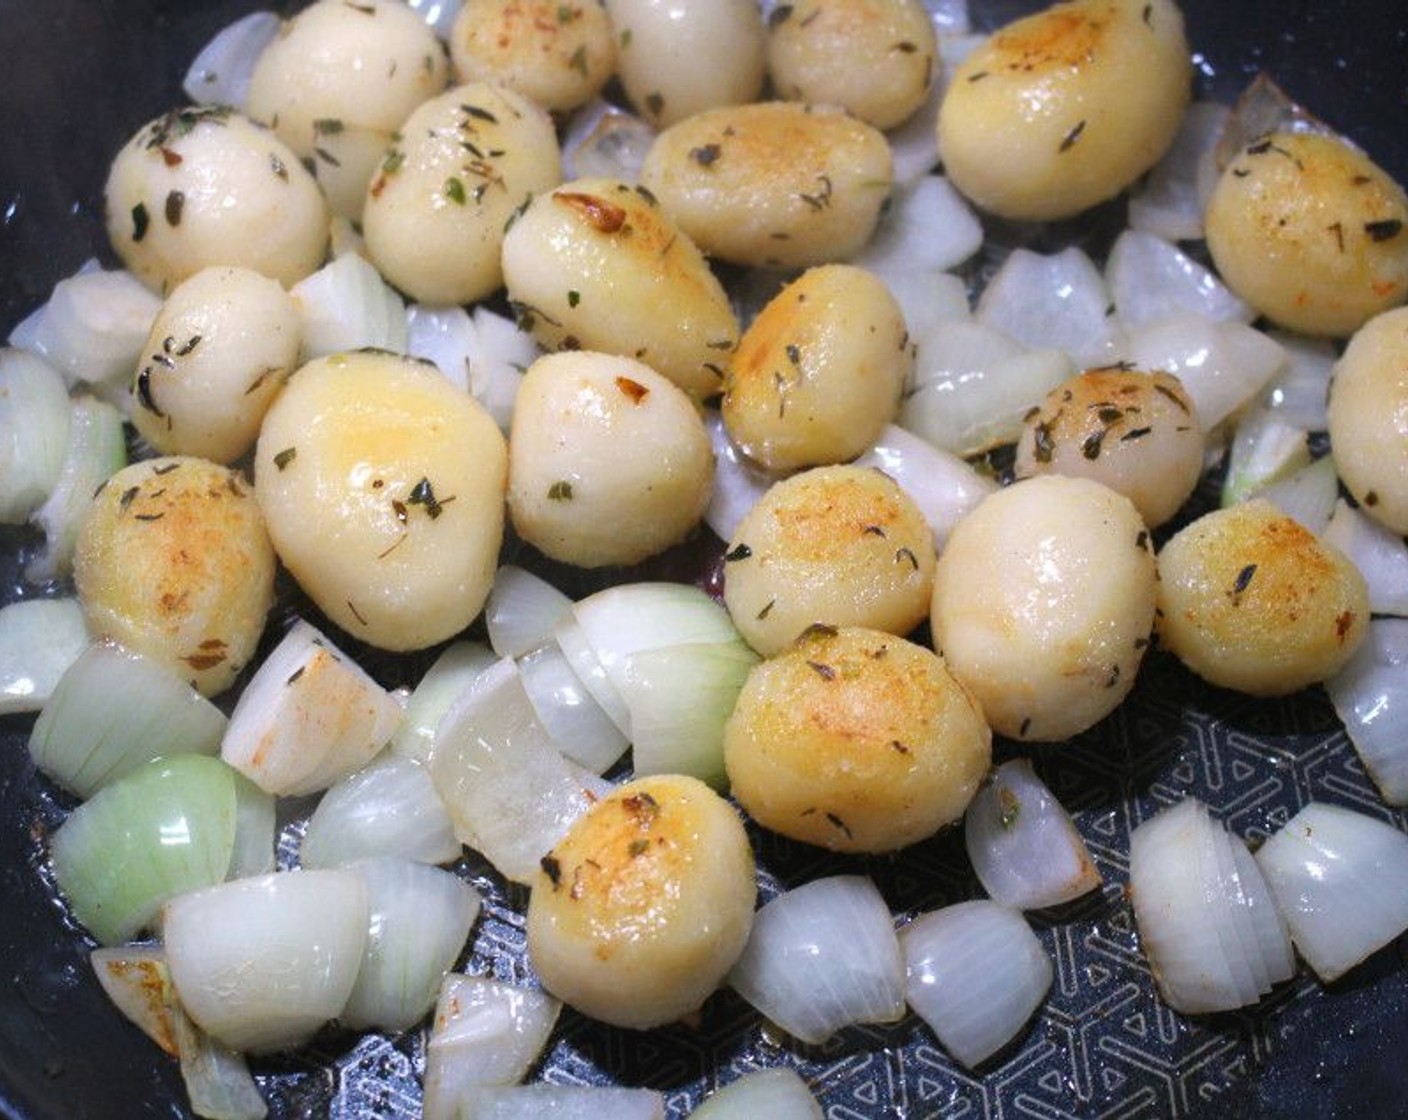 step 4 In the same pan, sauté Potatoes (2 cups) and Onion (1/2 cup) in Butter (1/2 cup). Season with Fresh Thyme (to taste), Fresh Oregano (to taste), Cayenne Pepper (to taste), and Kosher Salt (to taste).